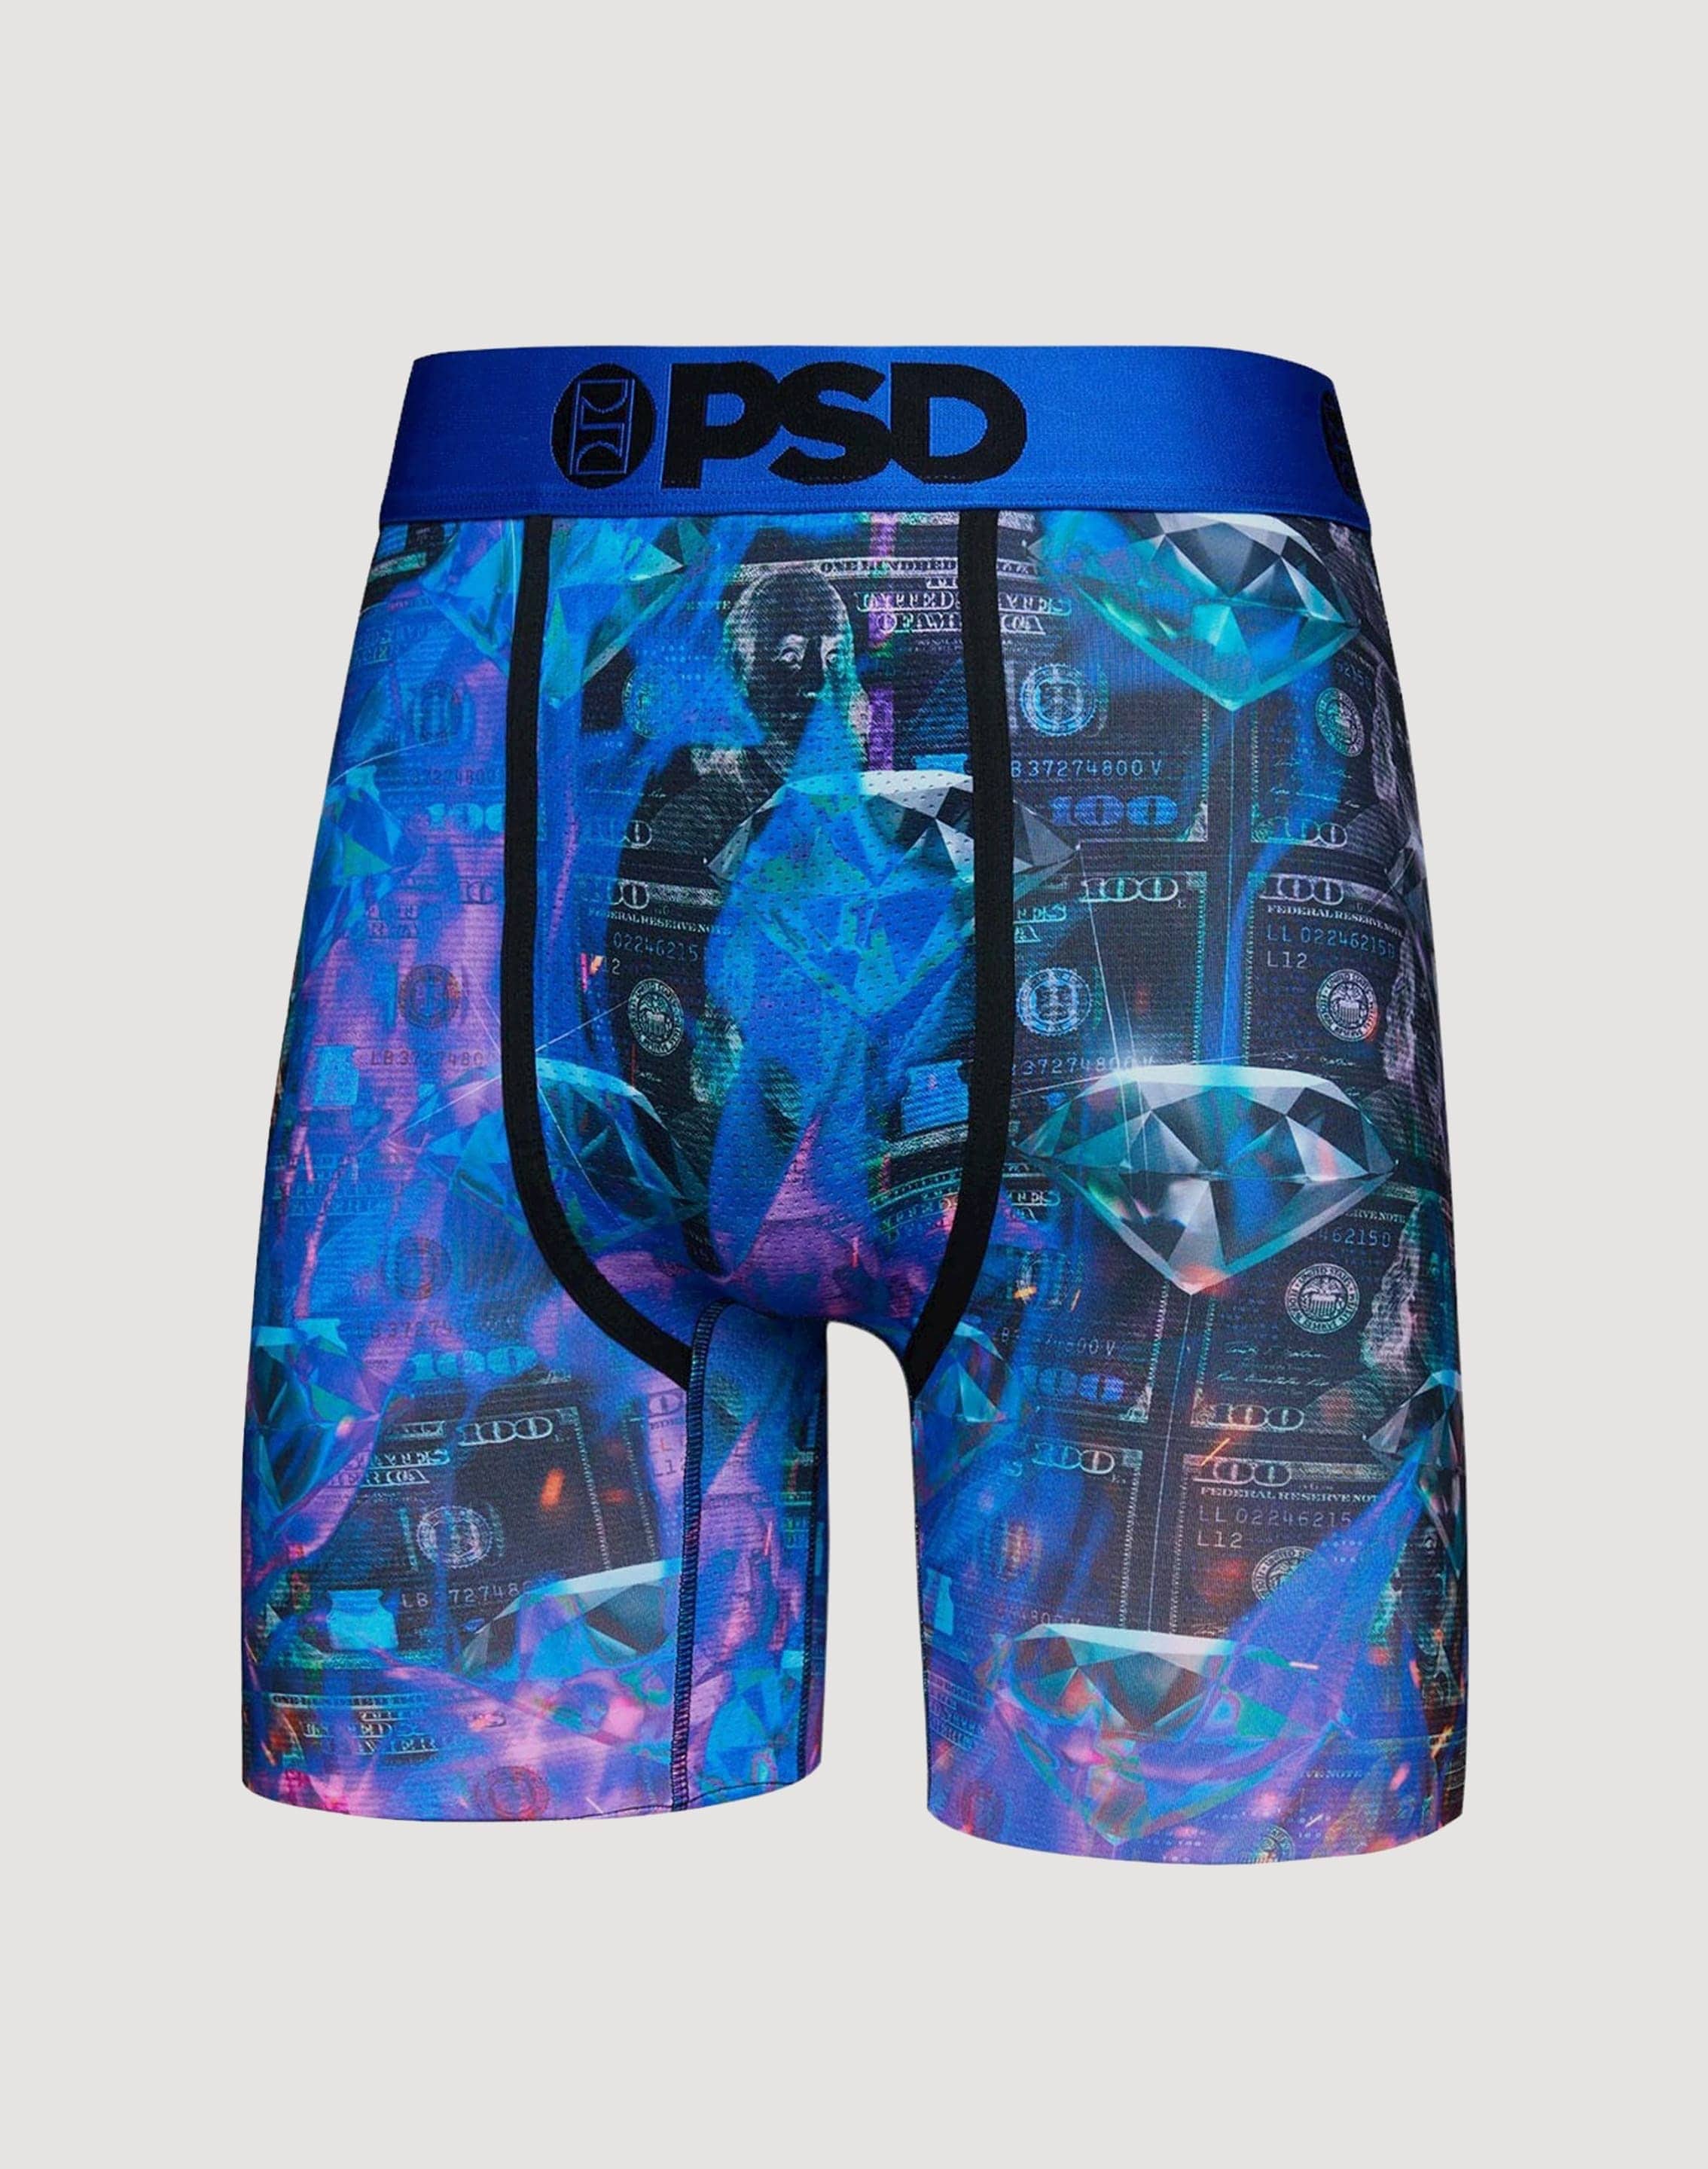 PSD Underwear Old Money Kyrie Irving Cash Athletic Mens, 55% OFF